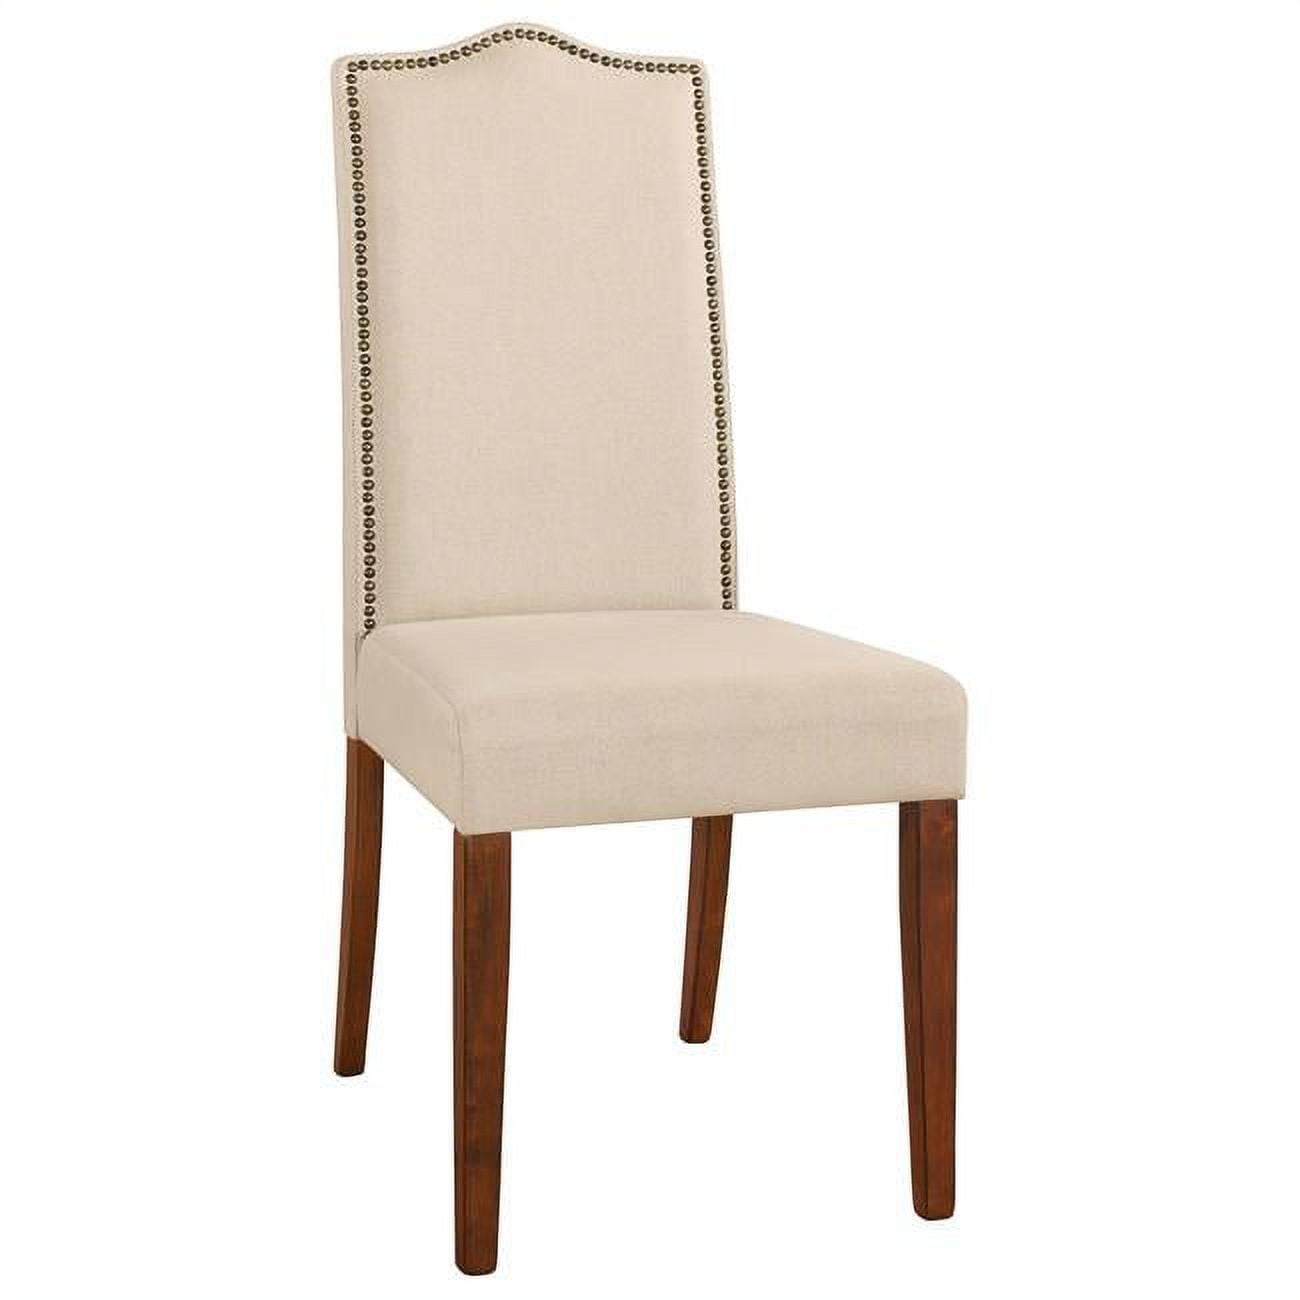 Picture of Carolina Cottage 1817-NCLN Romero Parson Chair - Chestnut with Linen - 22.5 x 41.5 x 18.5 in.